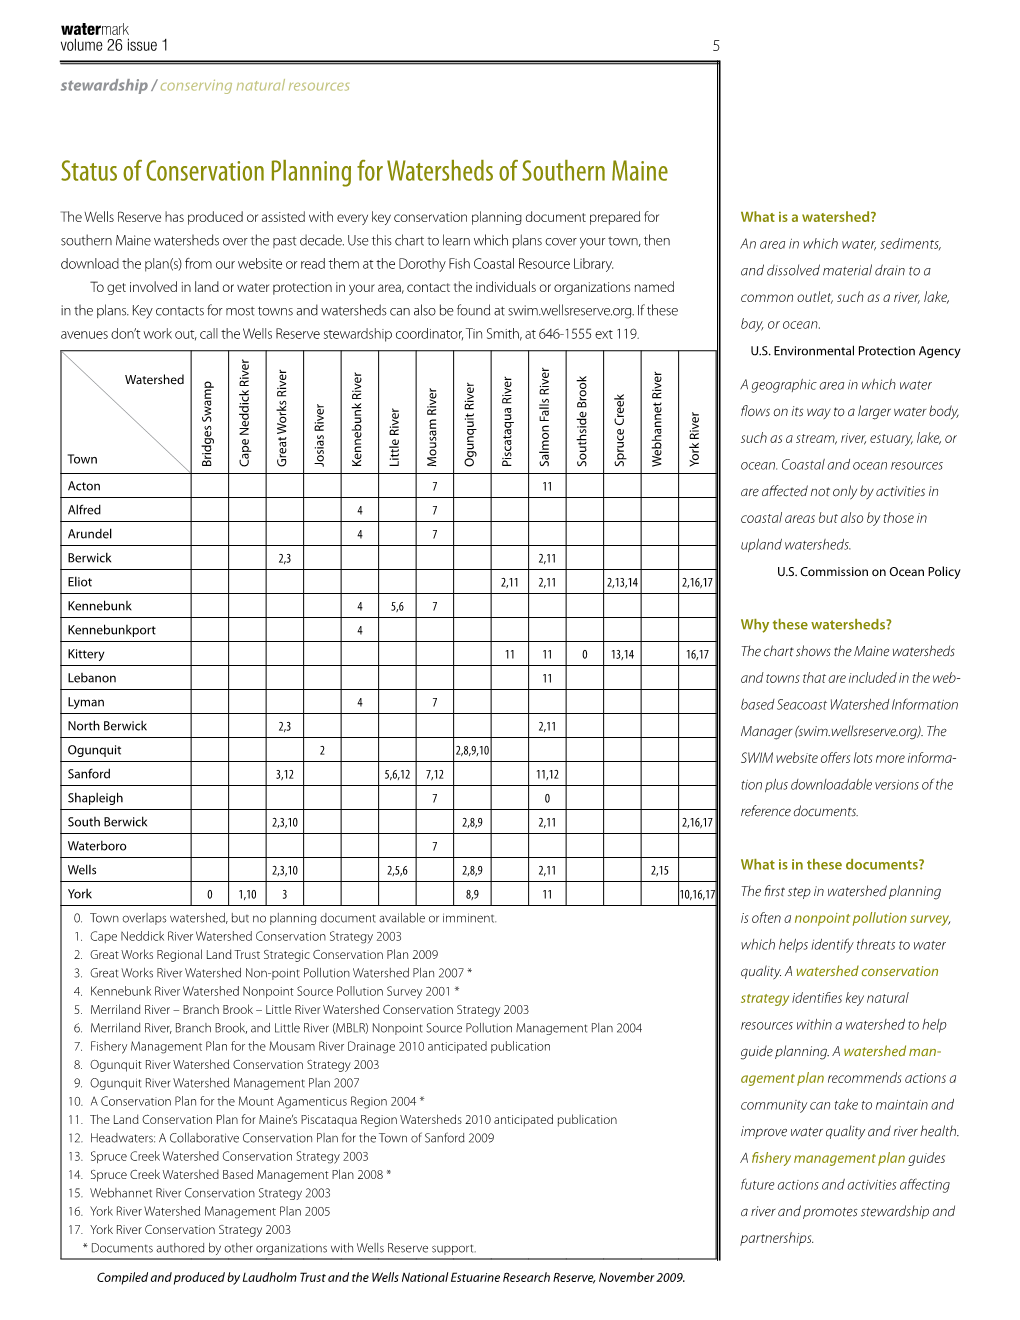 Status of Conservation Planning for Watersheds of Southern Maine